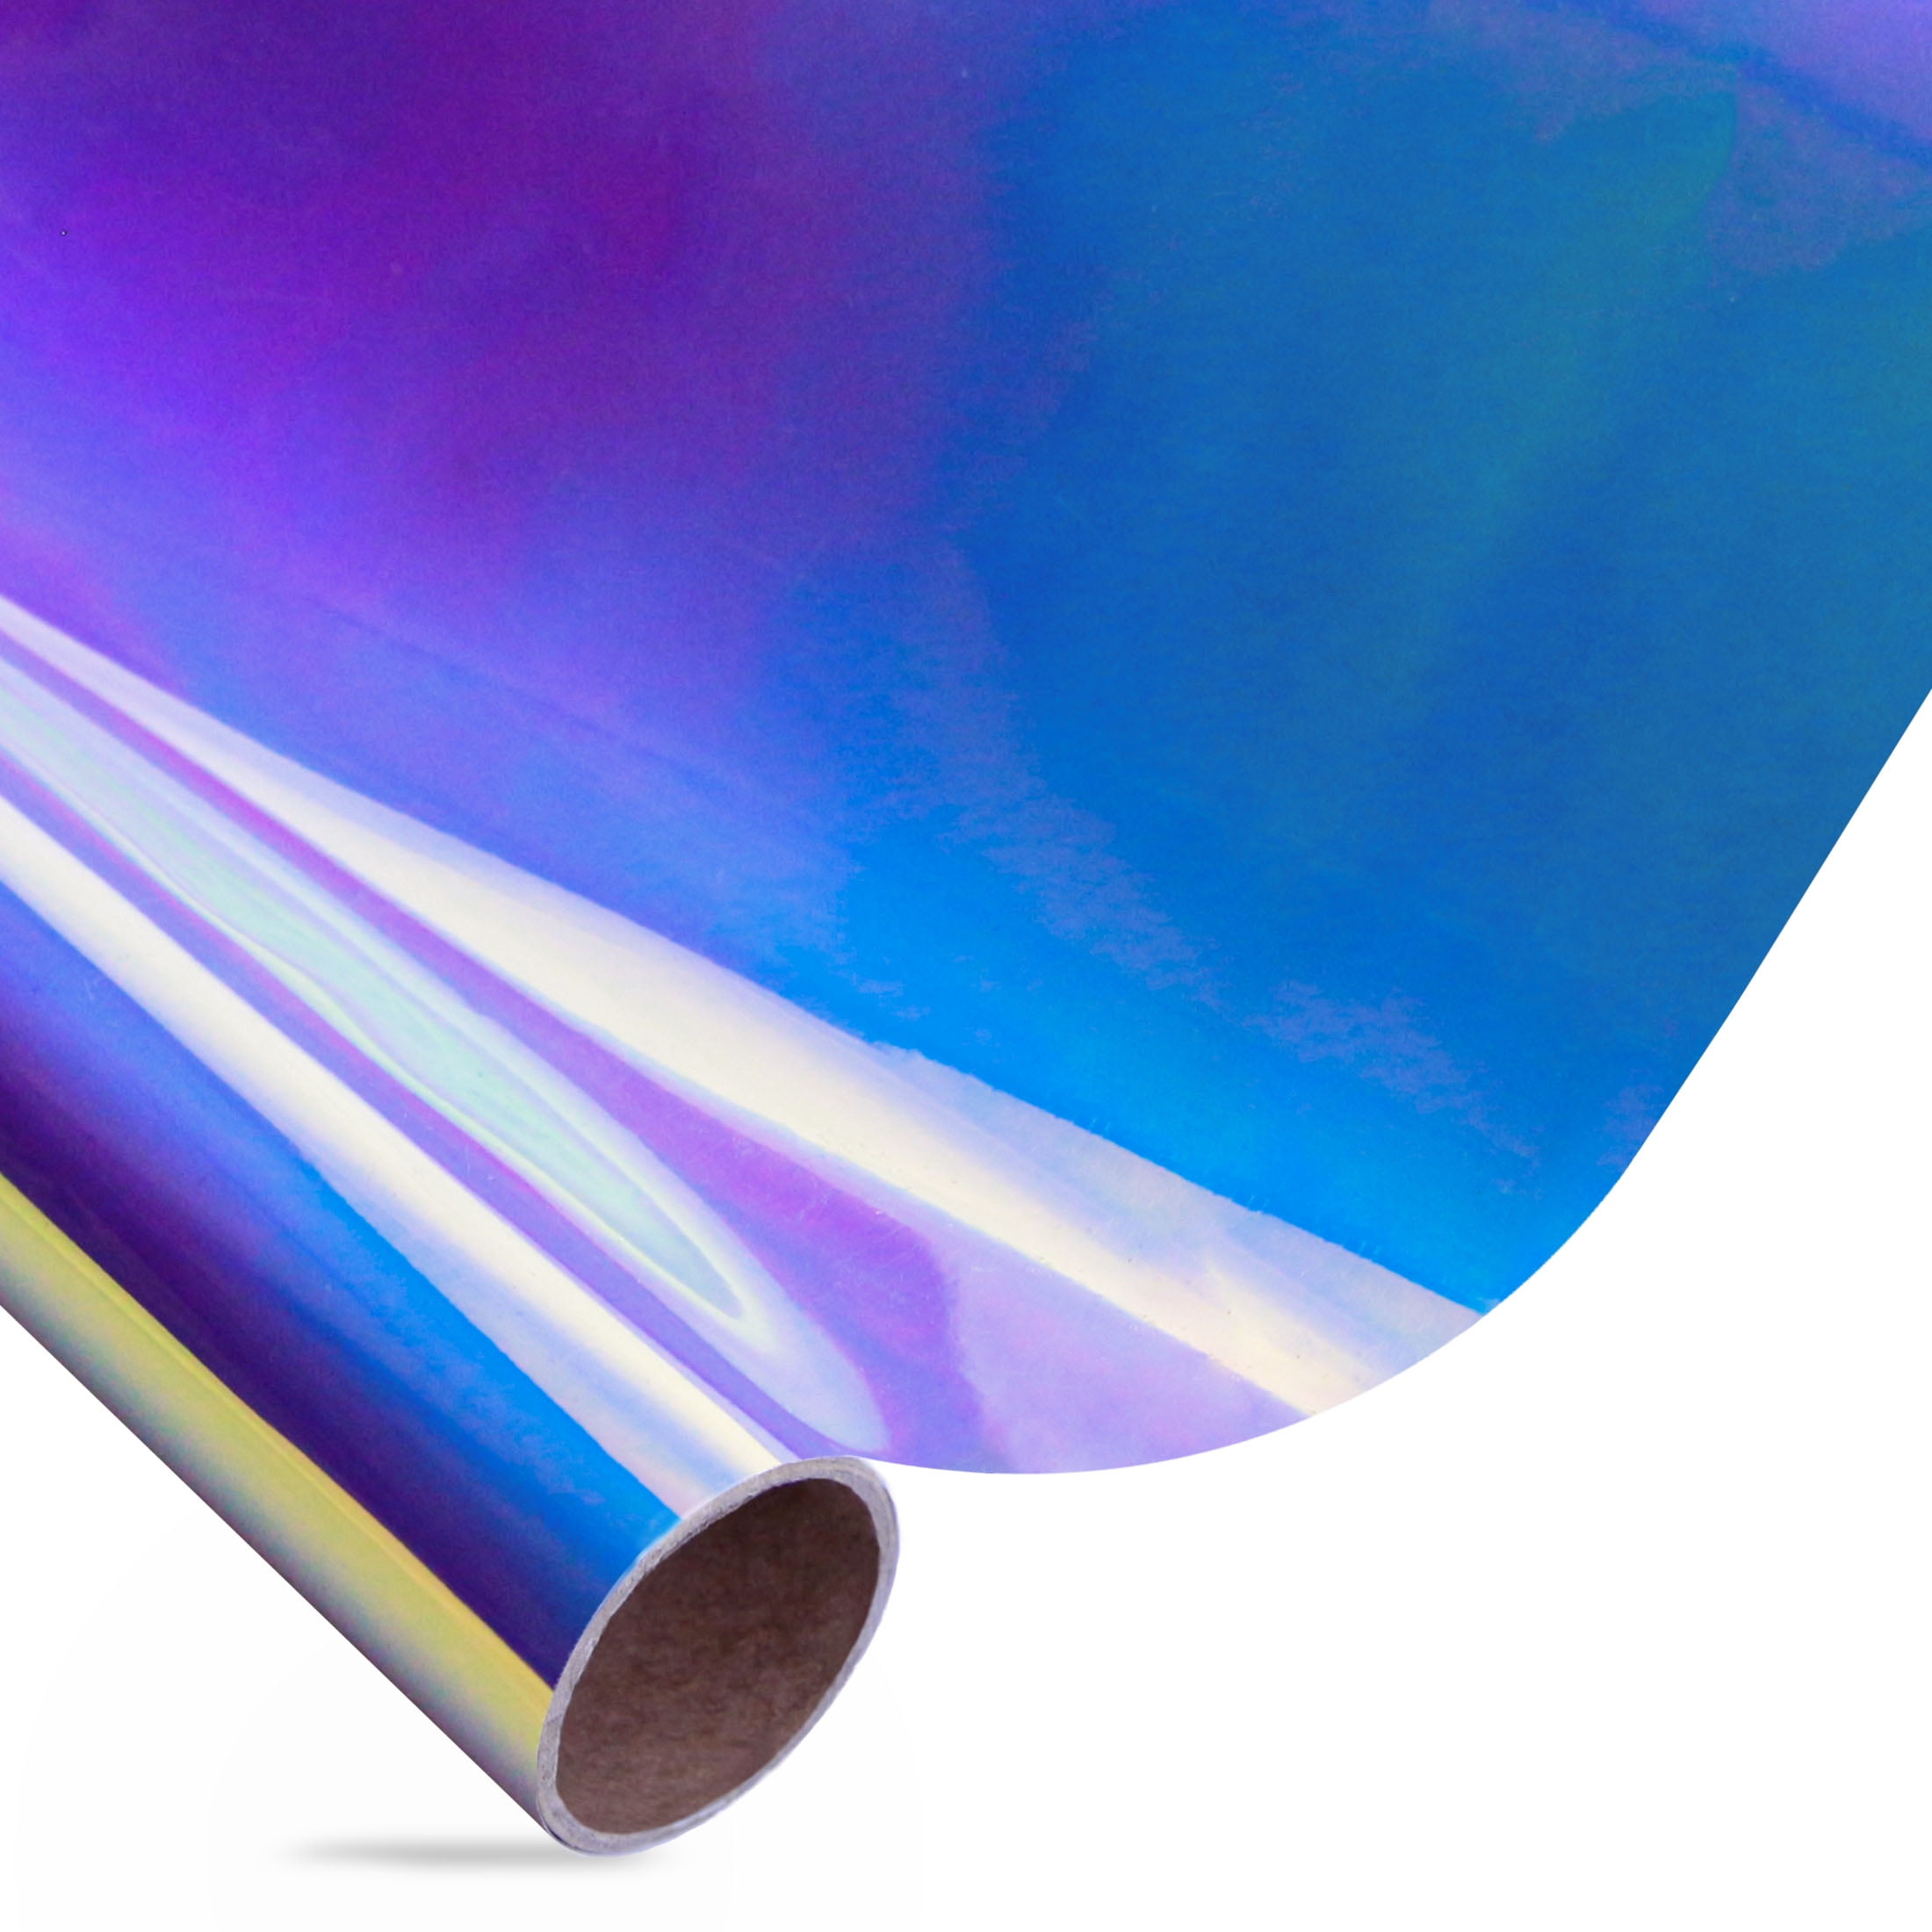 Iridescent Heat Transfer Vinyl - ColorSpark HTV - 5-foot Roll - Choose from  4 Iridescent Opal Colors